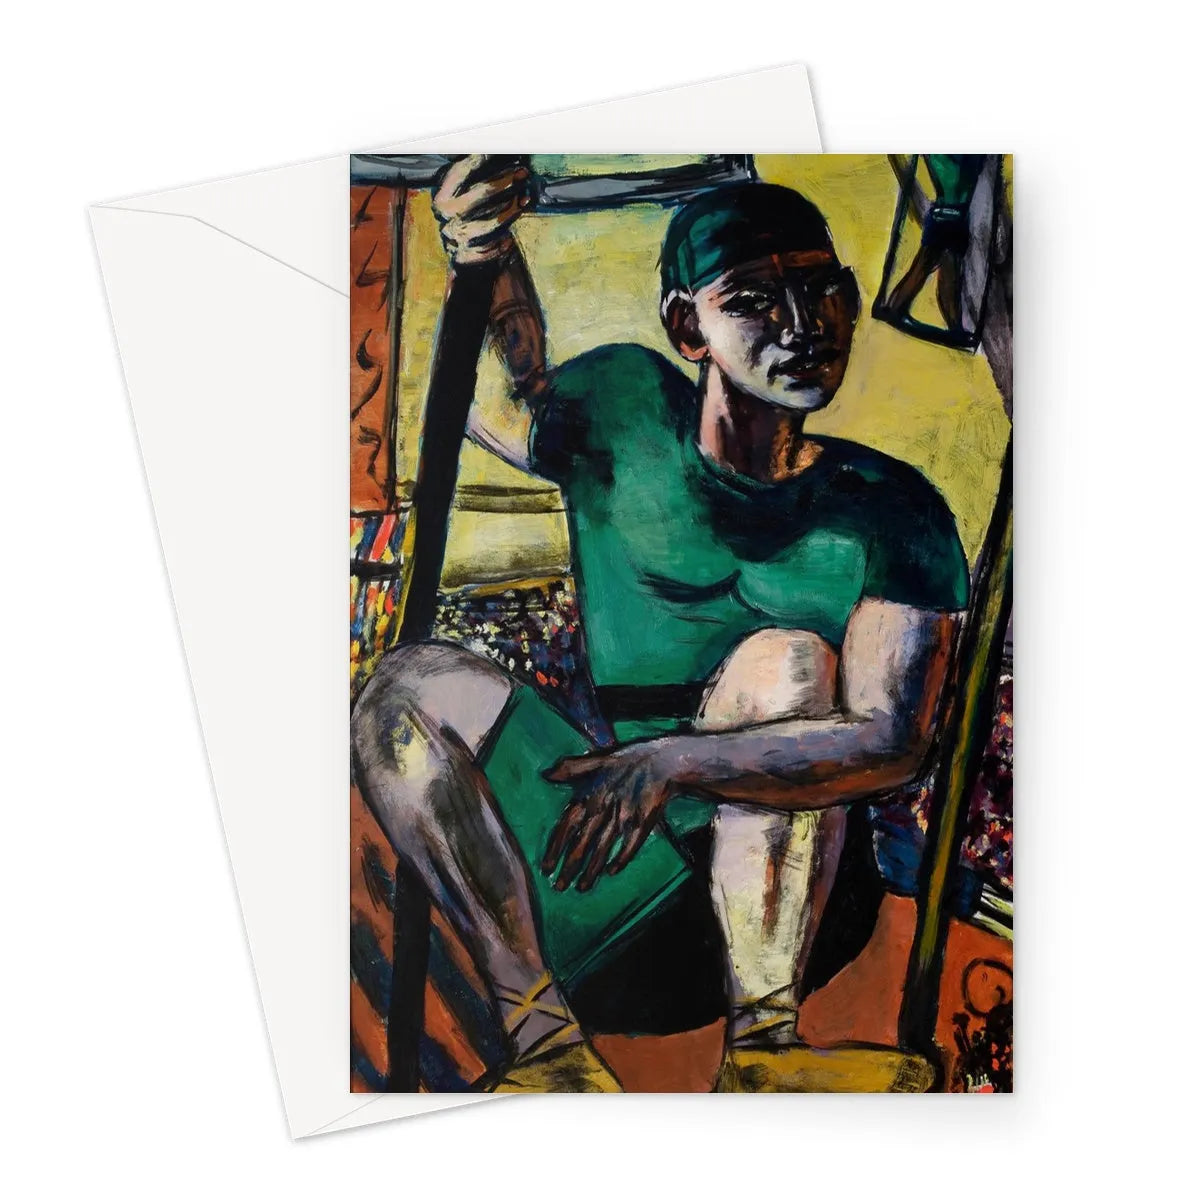 Acrobat On The Trapeze By Max Beckmann Greeting Card - A5 Portrait / 1 Card - Greeting & Note Cards - Aesthetic Art